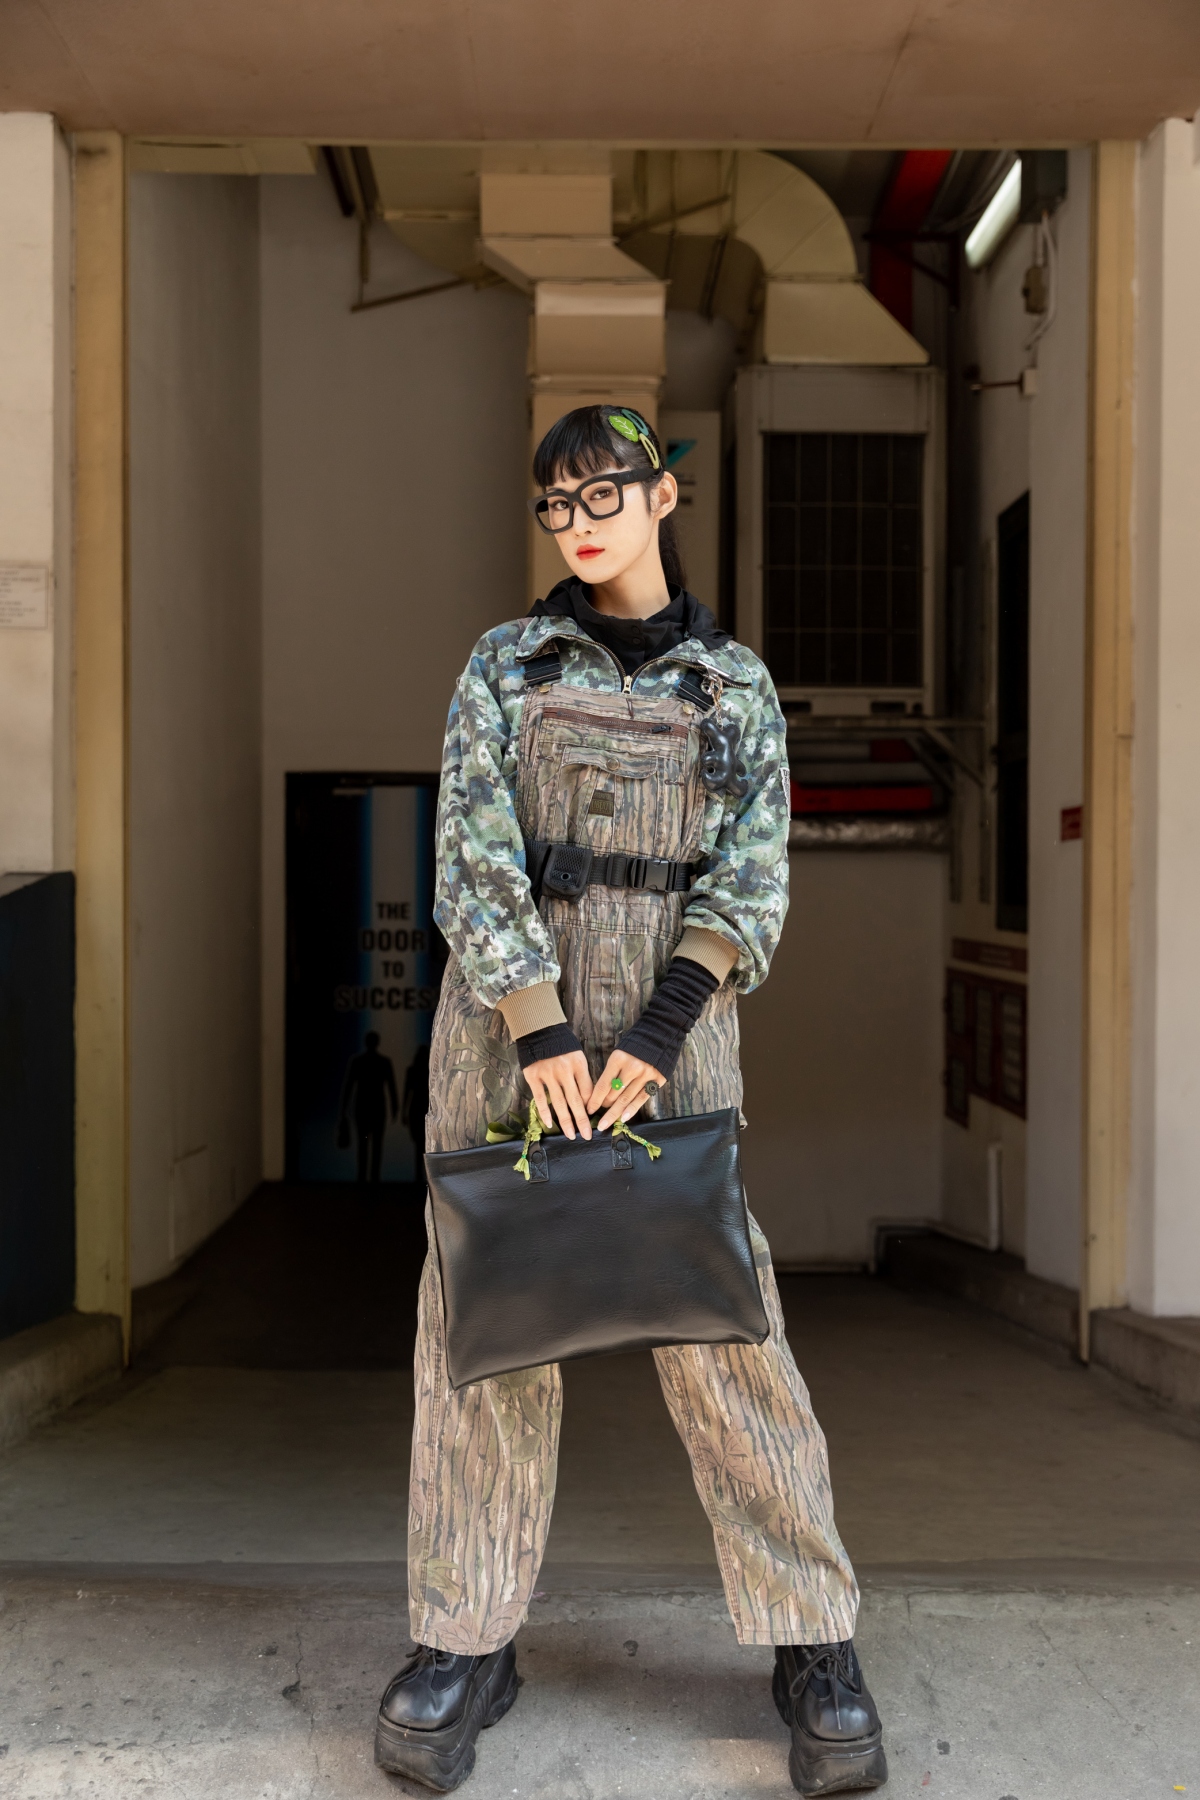 A hau mau thuy dien nguyen cay xanh trong ngay thu 5 the best street style 2020 hinh anh 9